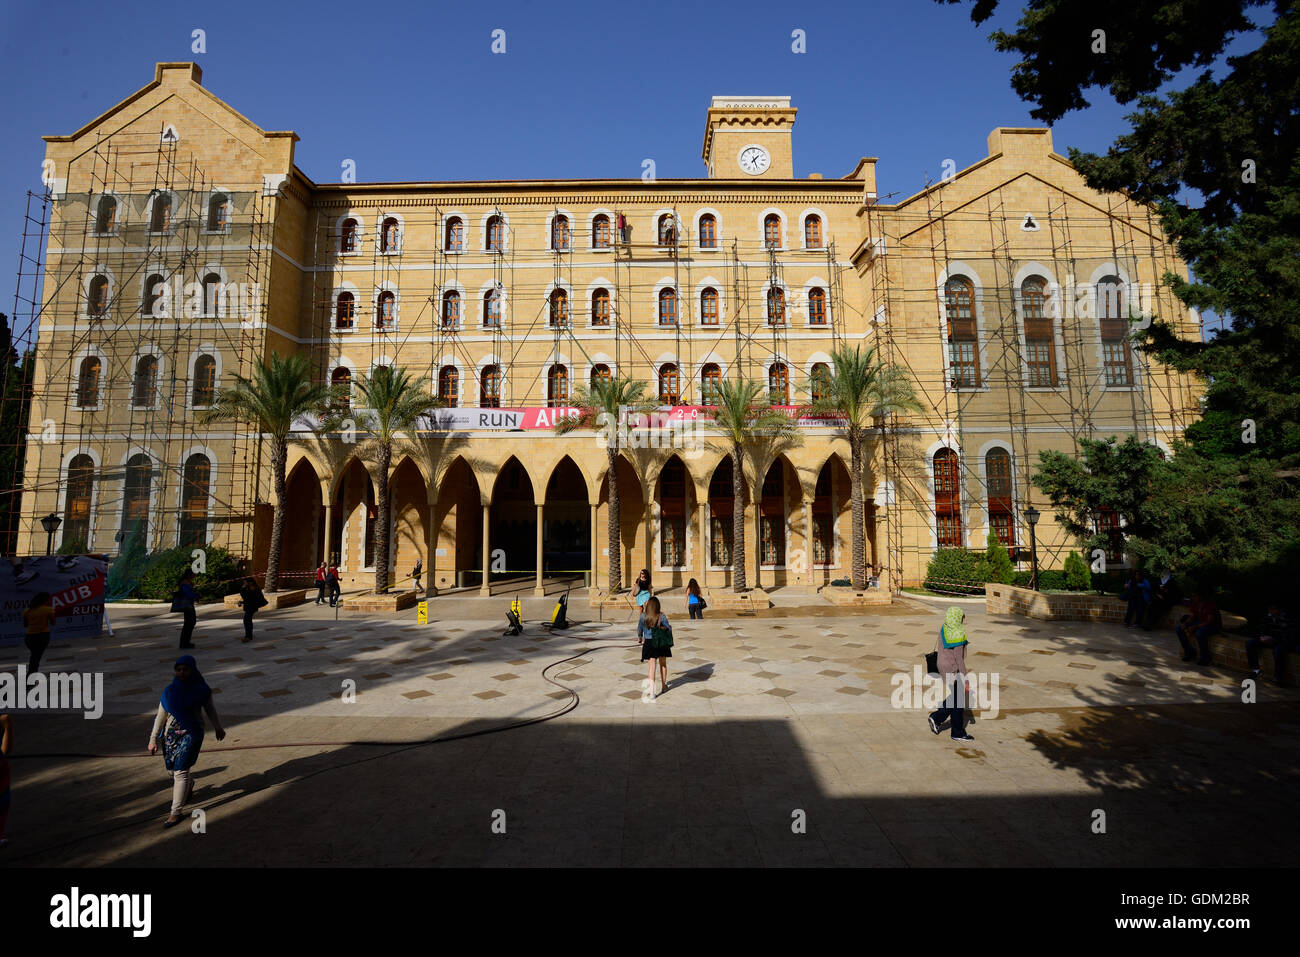 Lebanon, Beirut(LF)The campus of the American University of Beirut (AUB)(LF)The AUB is a private, secular, and independent university with 8000 students. Founded in 1866 as the first American university located outside the U.S.A, it is ranked today as the Stock Photo